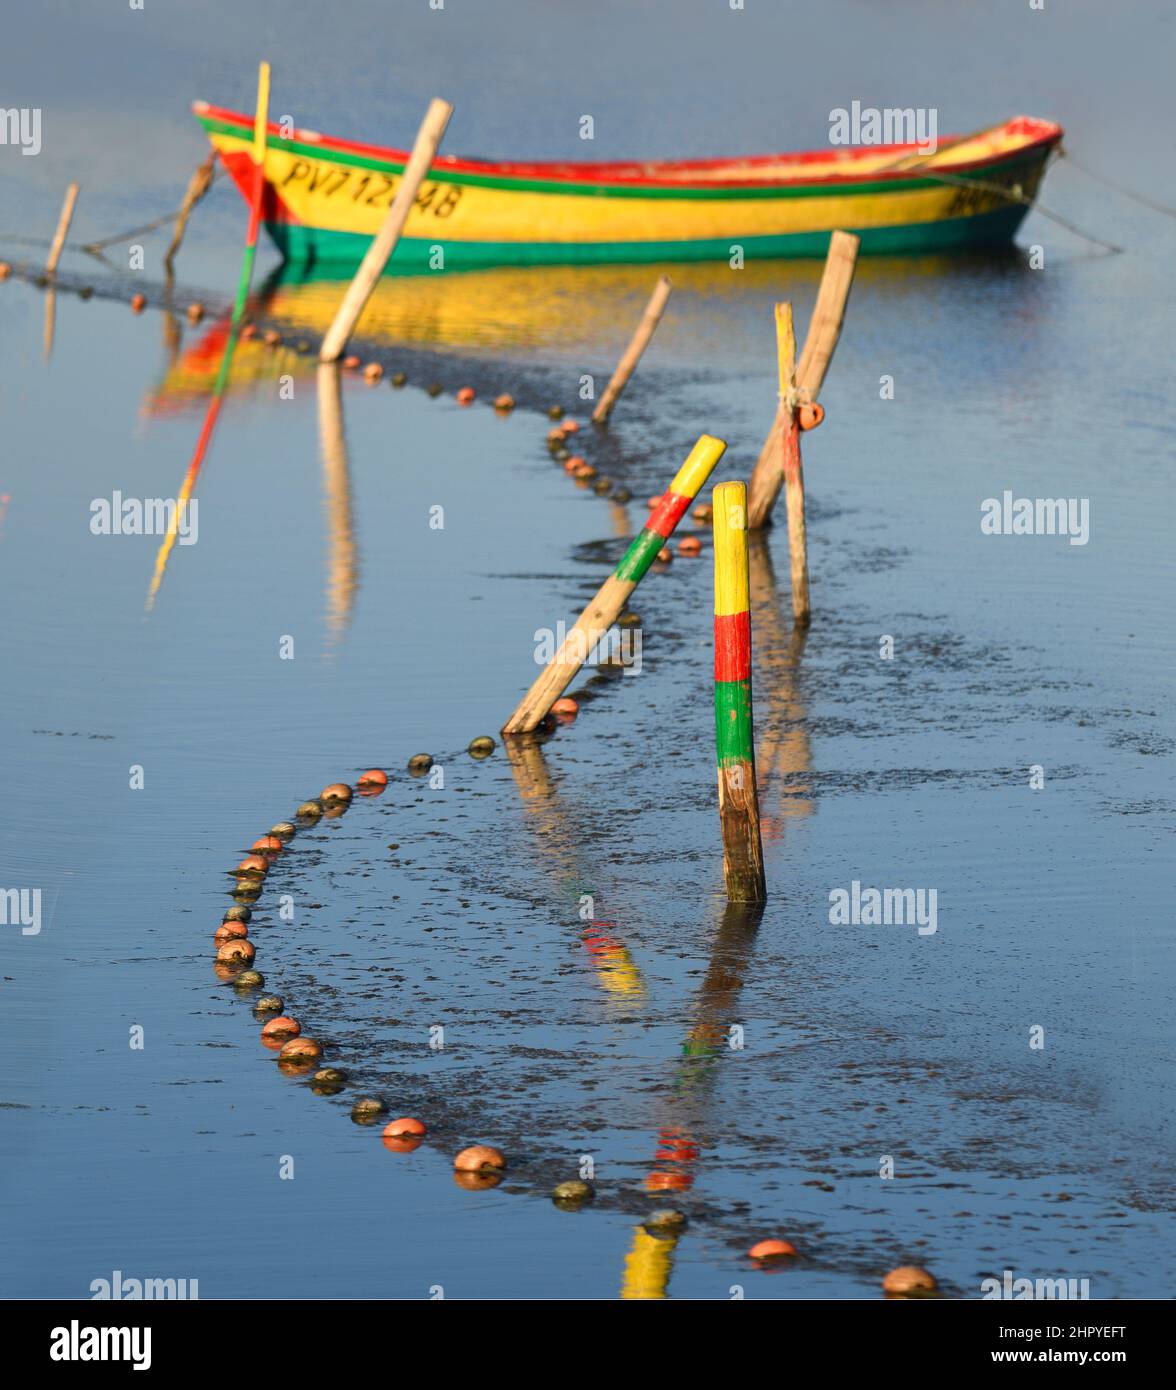 Boat and nets set for eel fishing, Gruissan pond, Aude, France Stock Photo